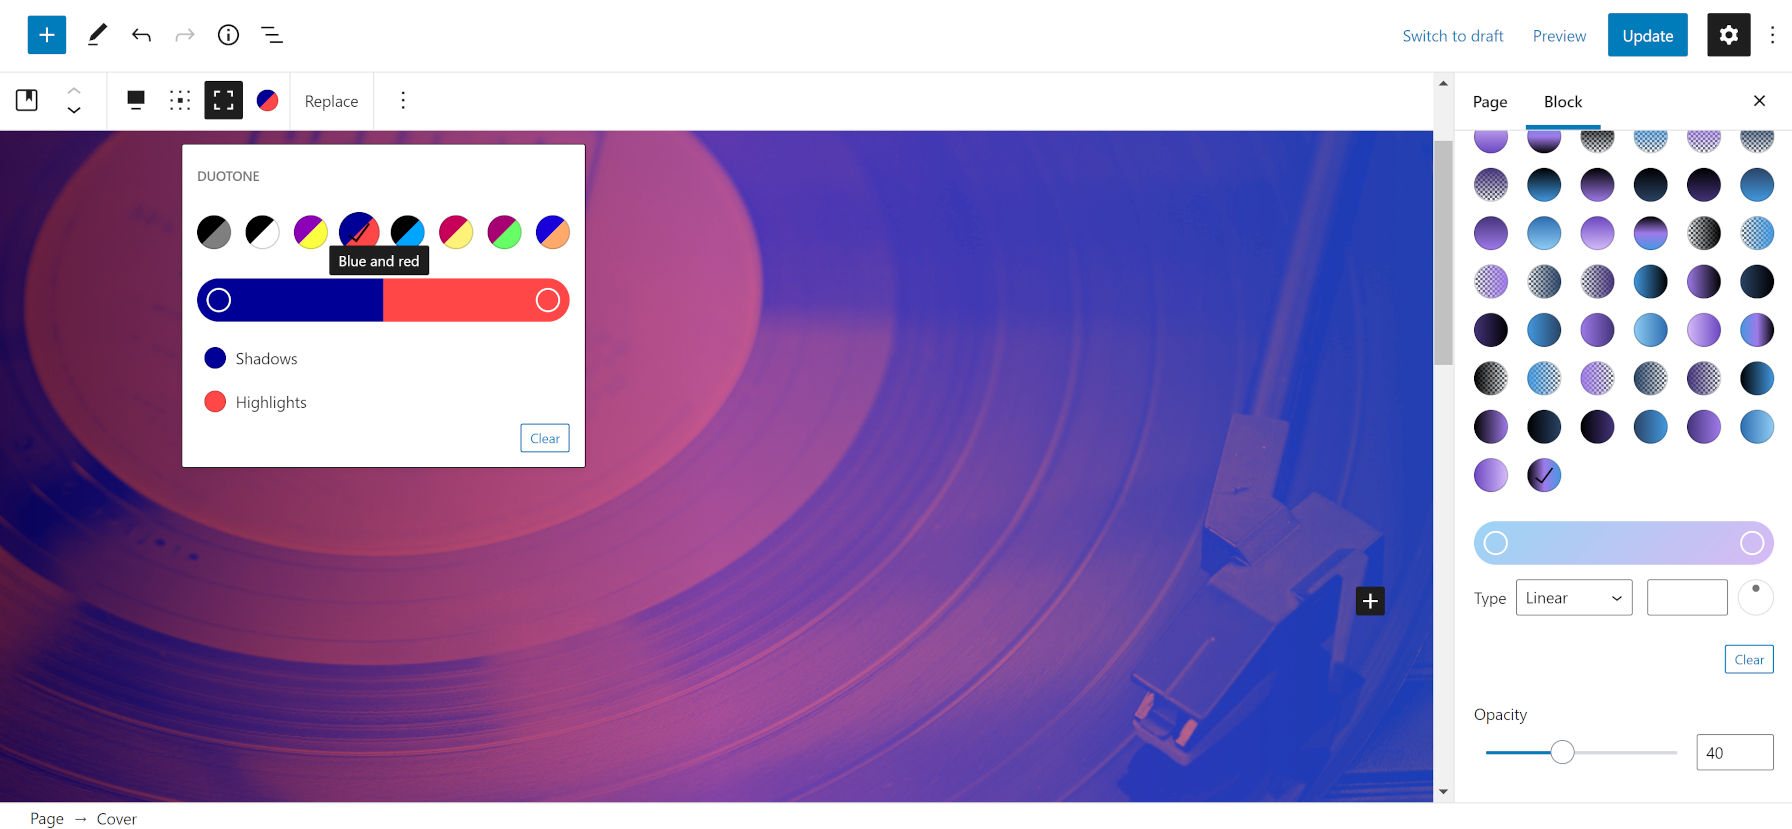 Applying a blue and red duotone filter along with a black, purple, and blue transparent overlay on top of an image of a record and player.